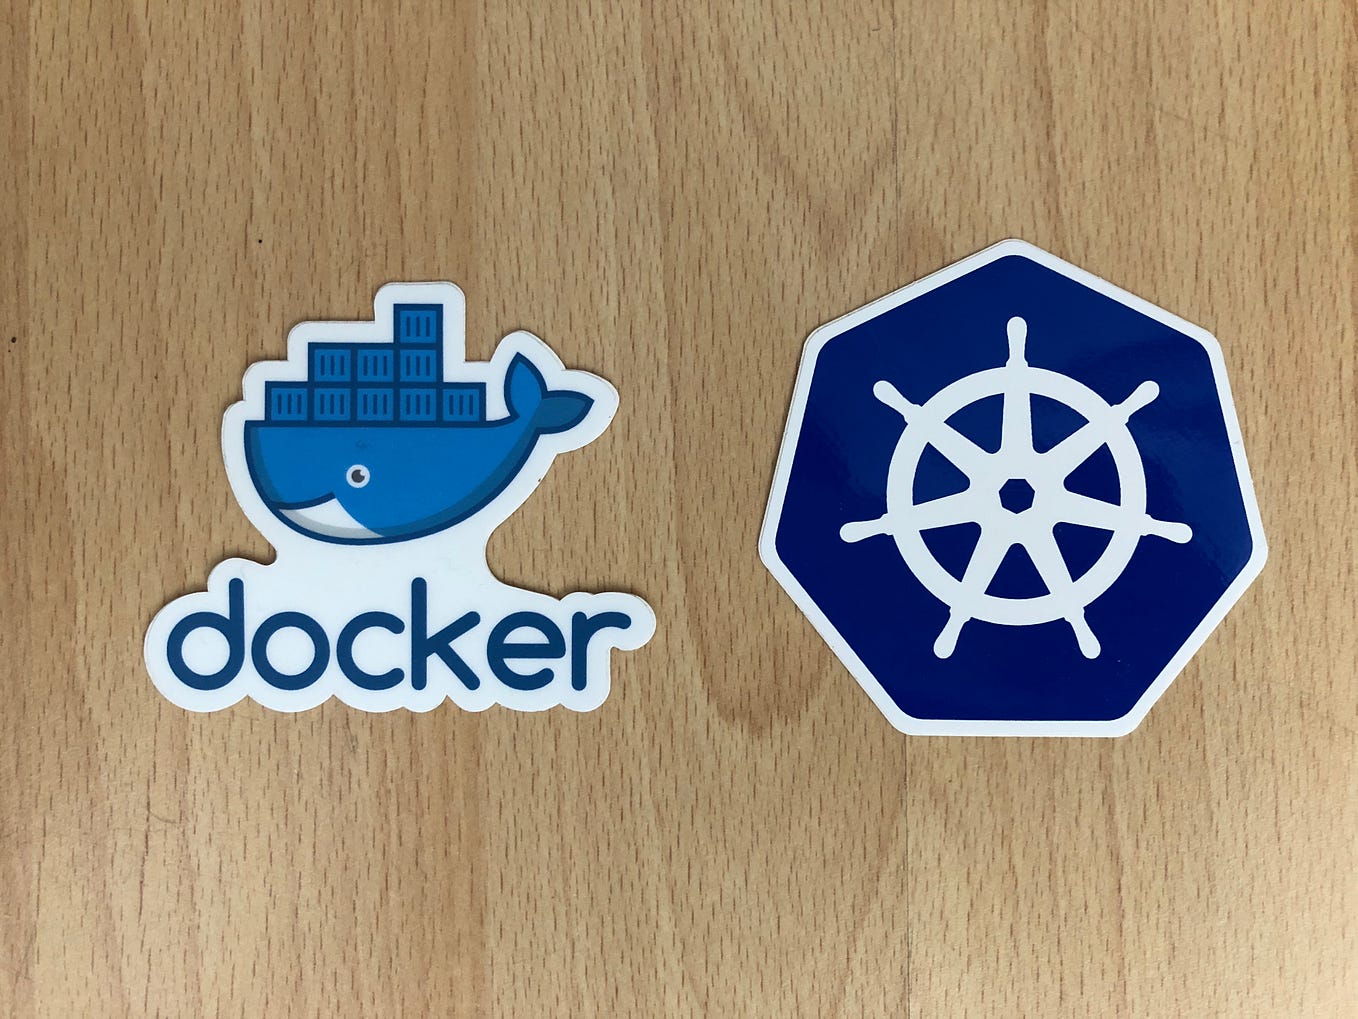 Accessing an application on Kubernetes in Docker